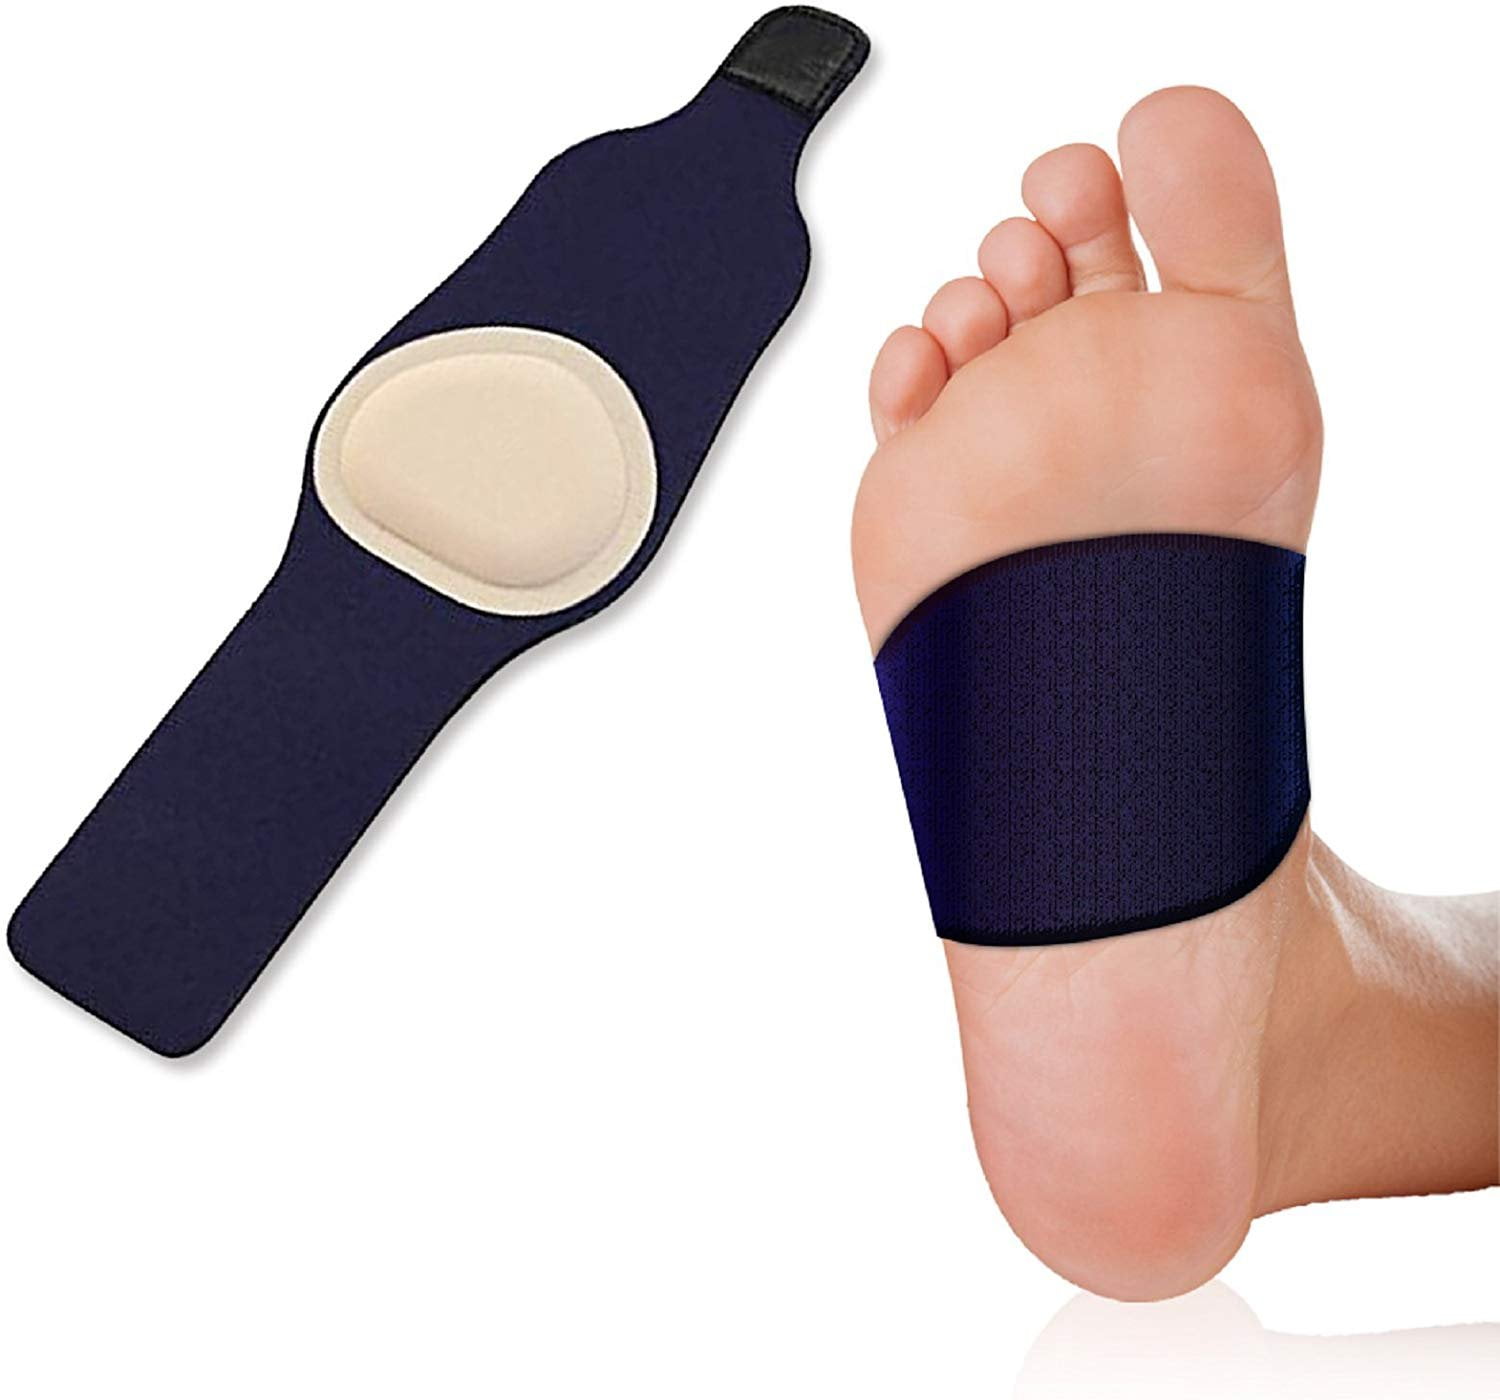 Arch Support Gel Orthotic Insole Plantar Fasciitis Foot Sleeve Cushion Support 